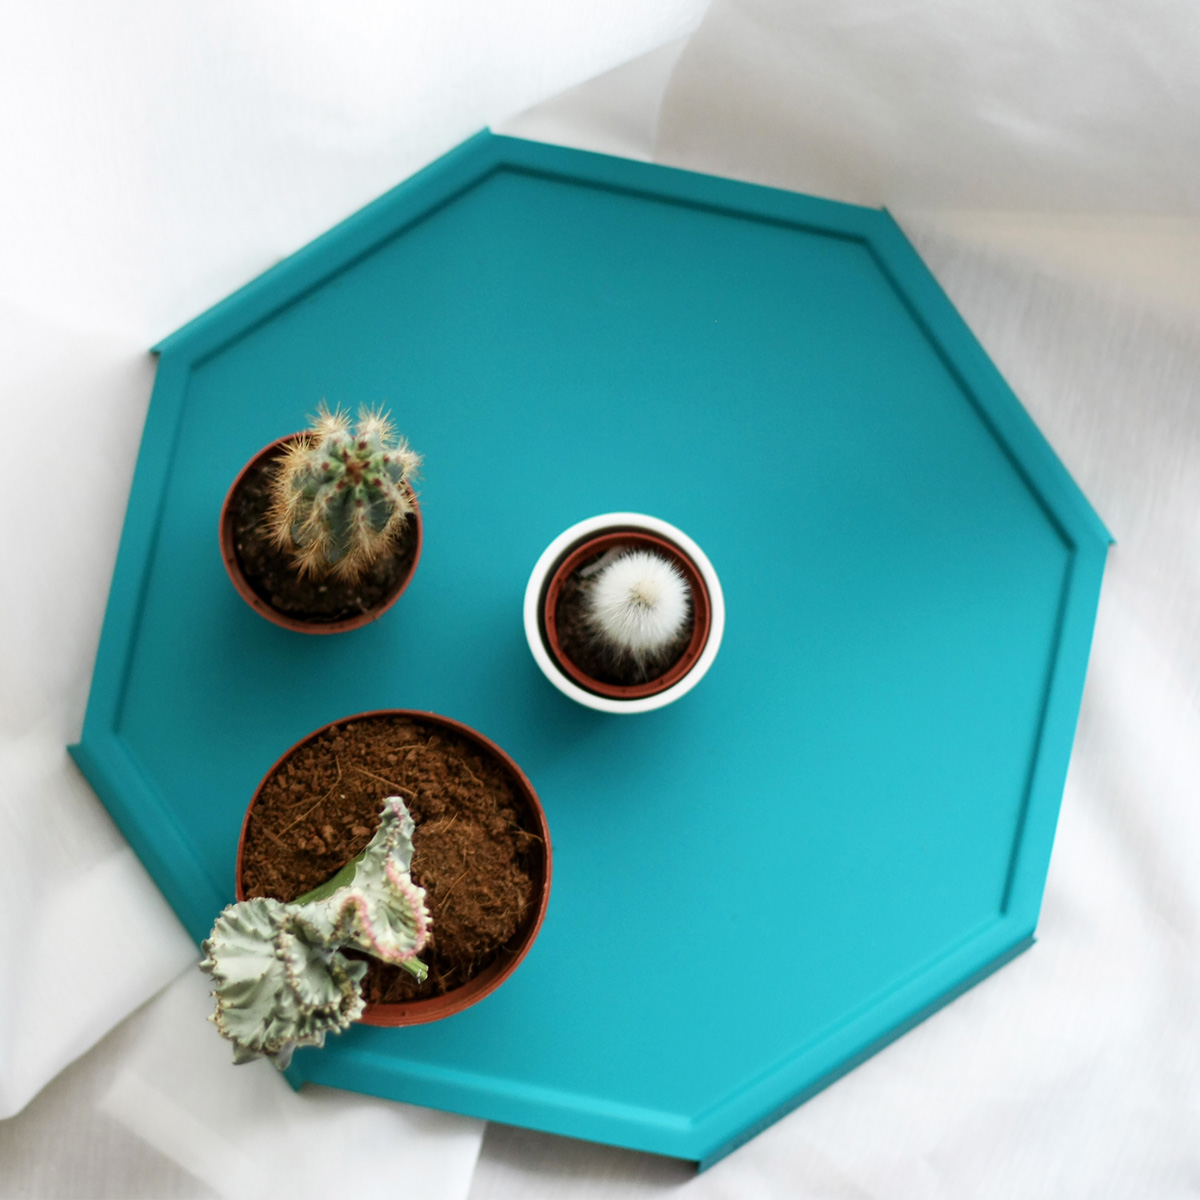 Teal serving tray